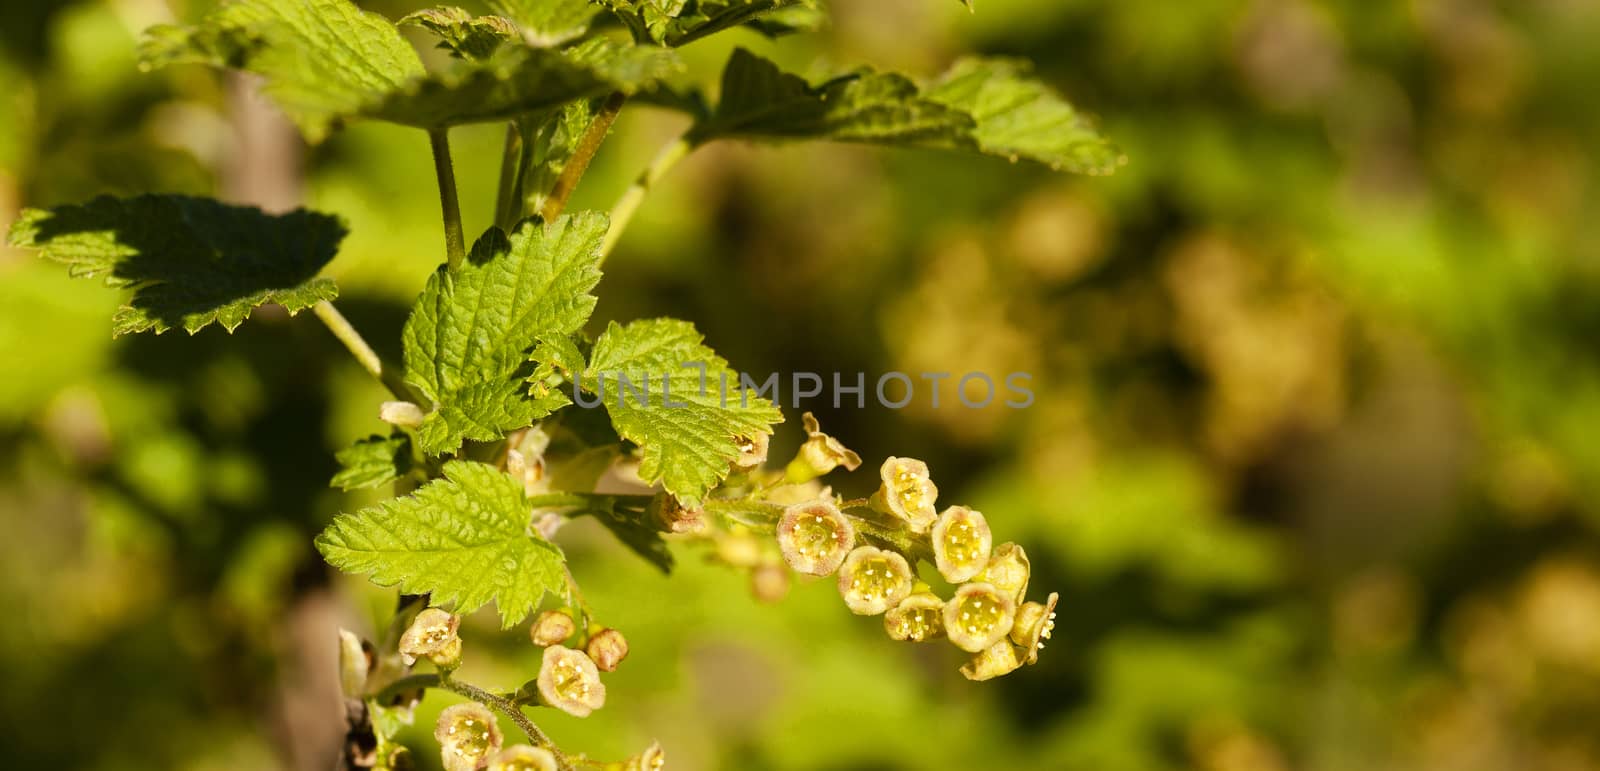   the blackcurrant flowers photographed by a close up. small depth of sharpness